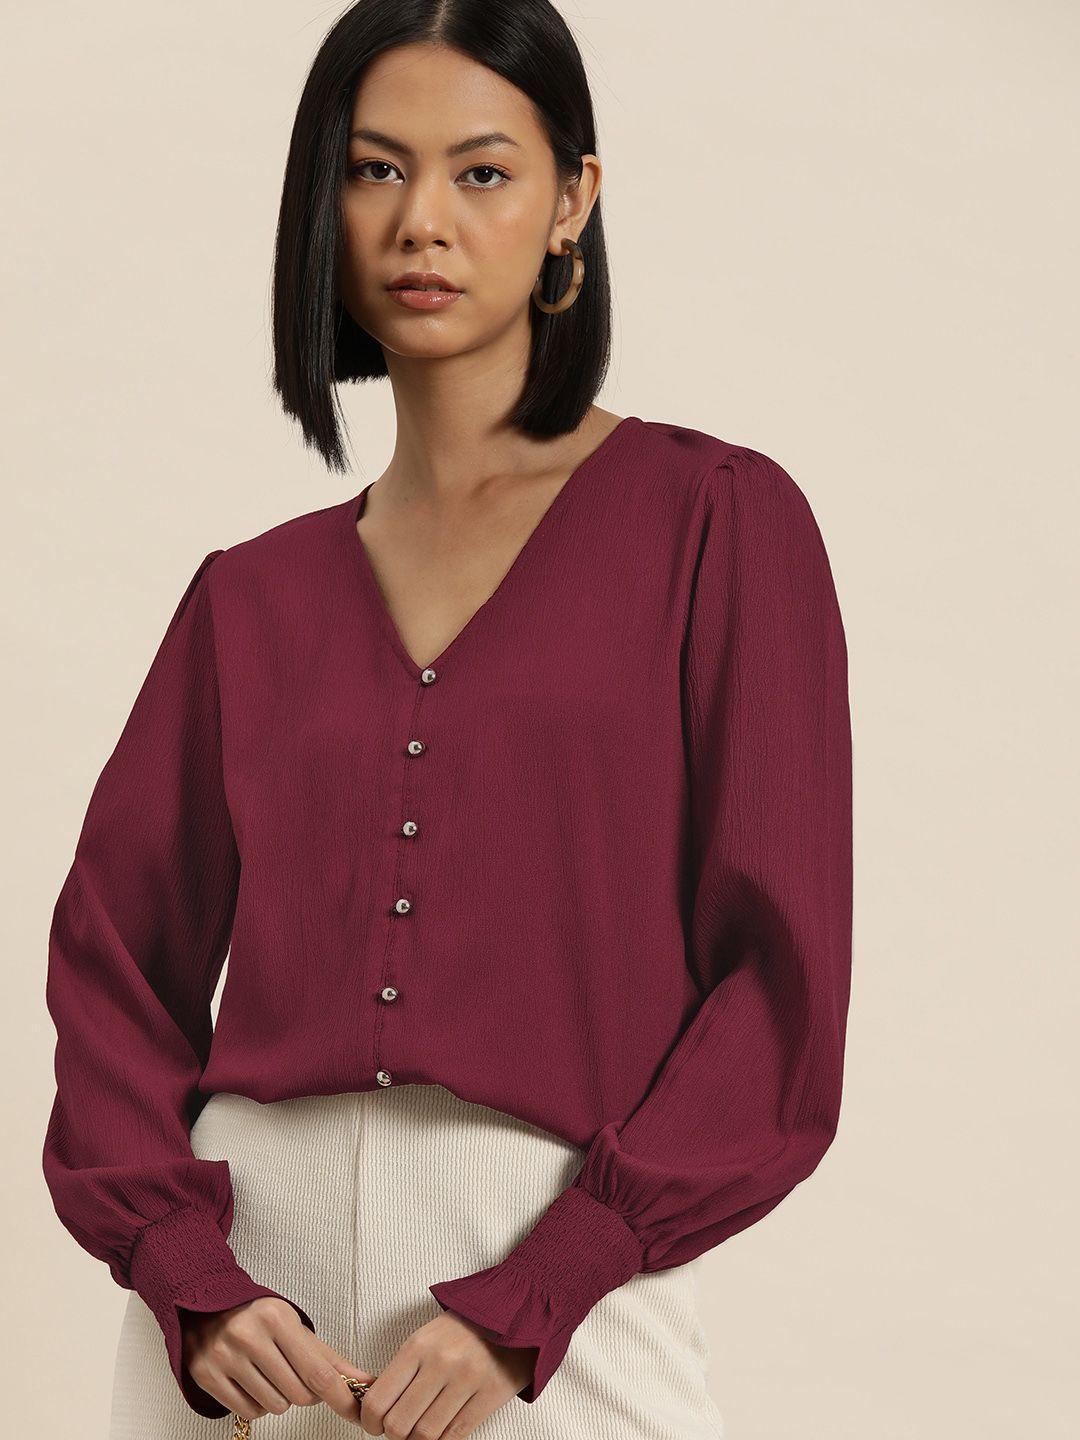 invictus-puff-sleeve-crepe-shirt-style-top